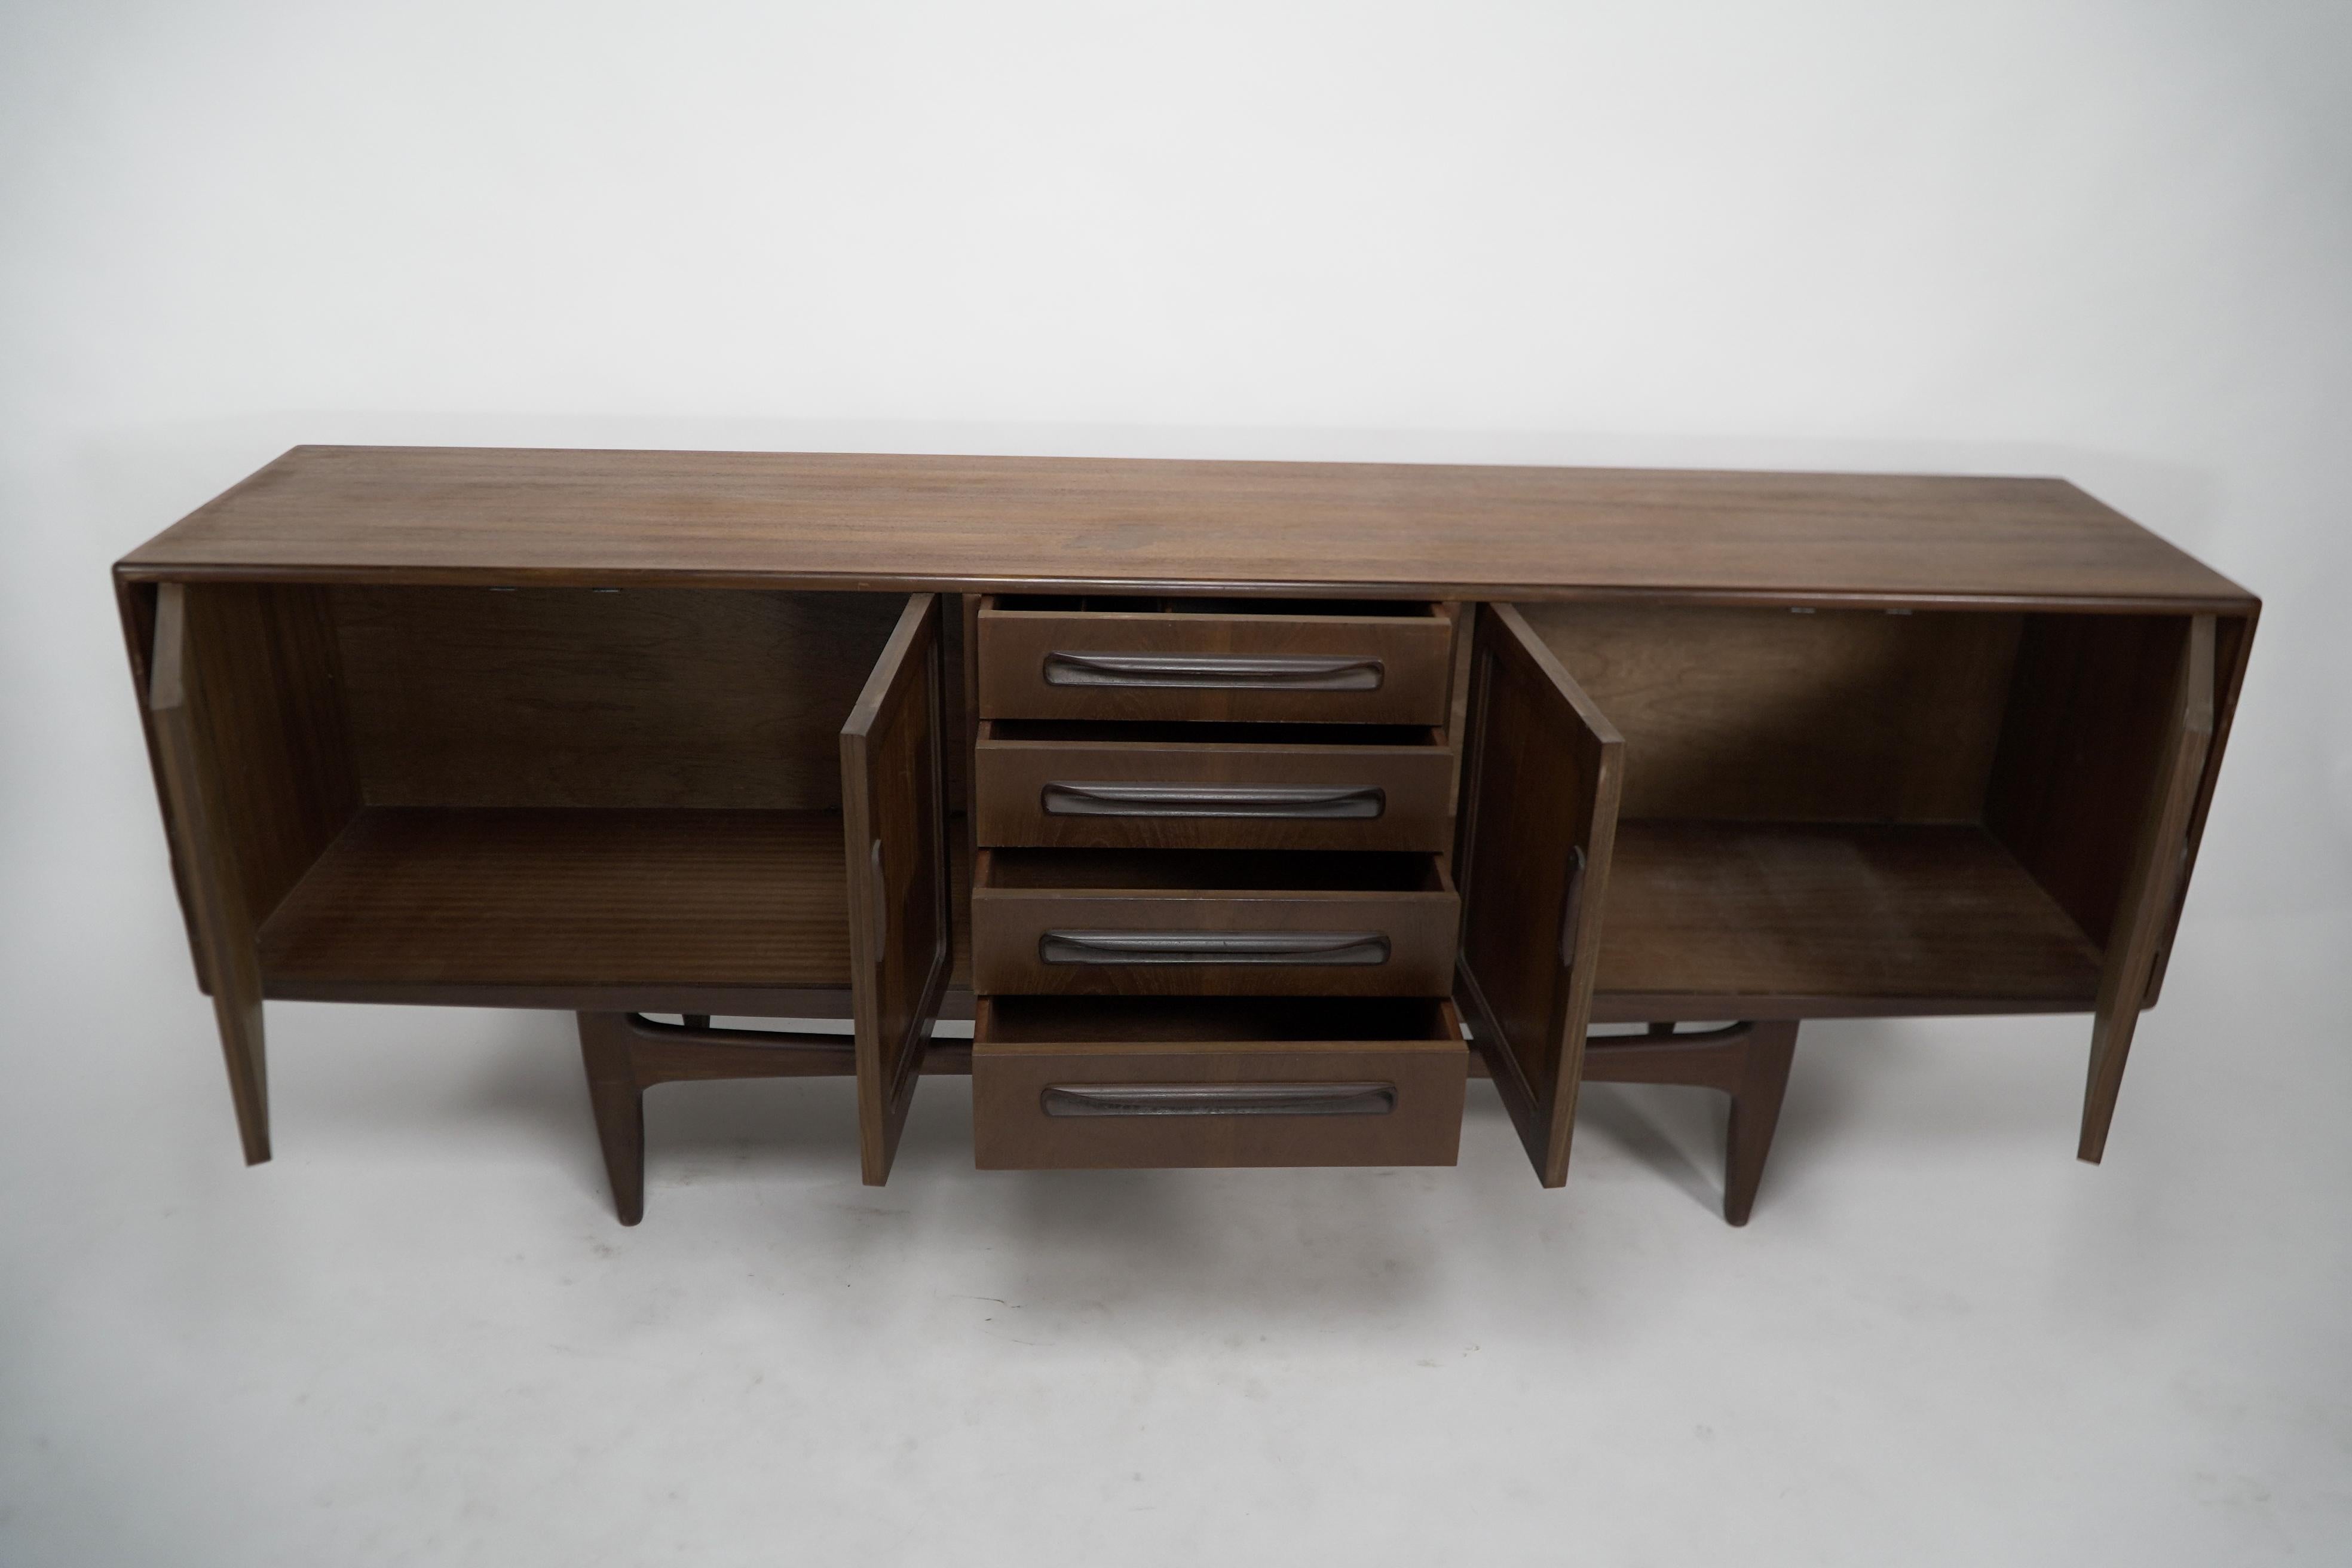 G Plan from the Fresco range designed by VB Wilkins. 
A longer than usual mid-century teak sideboard.